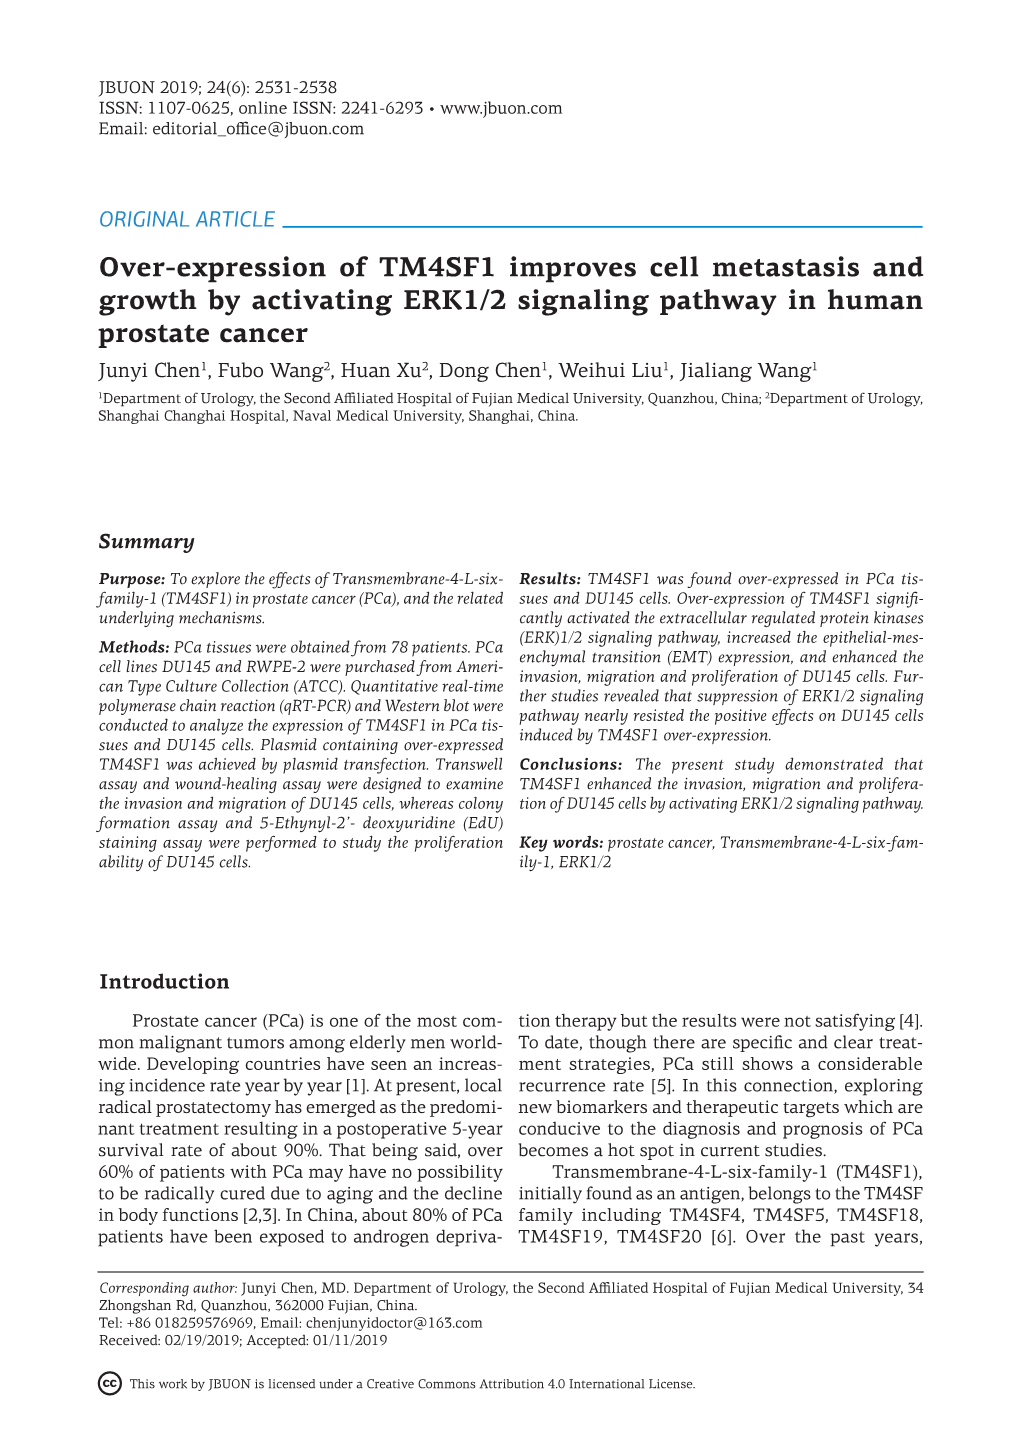 Over-Expression of TM4SF1 Improves Cell Metastasis and Growth